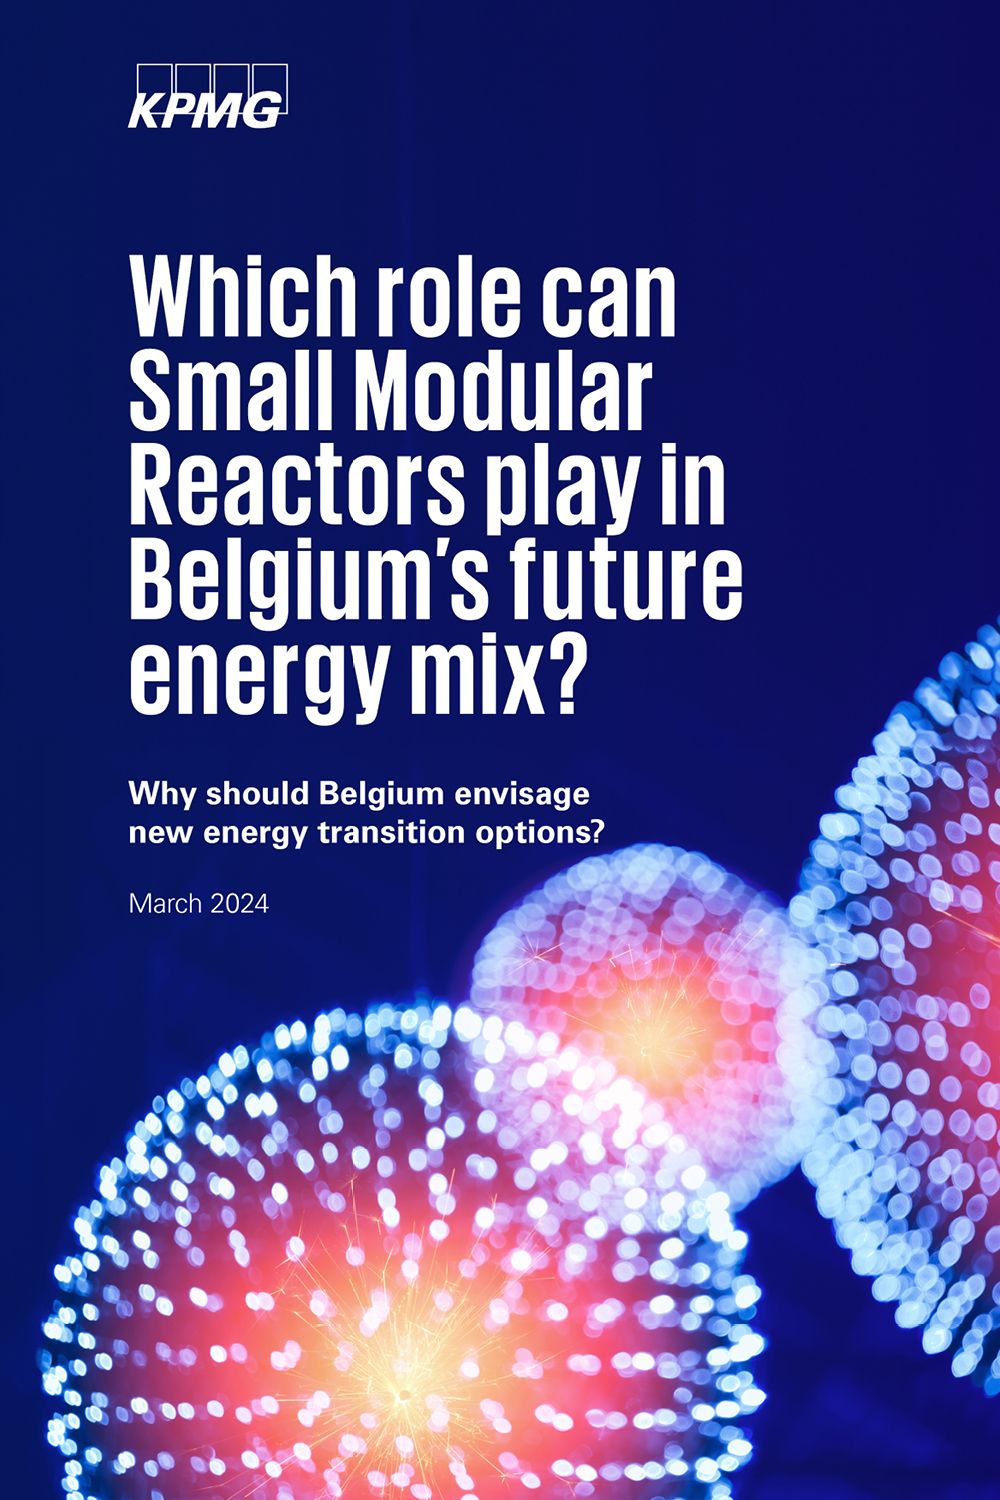 Which role can Small Modular Reactors play in Belgium’s future energy mix?